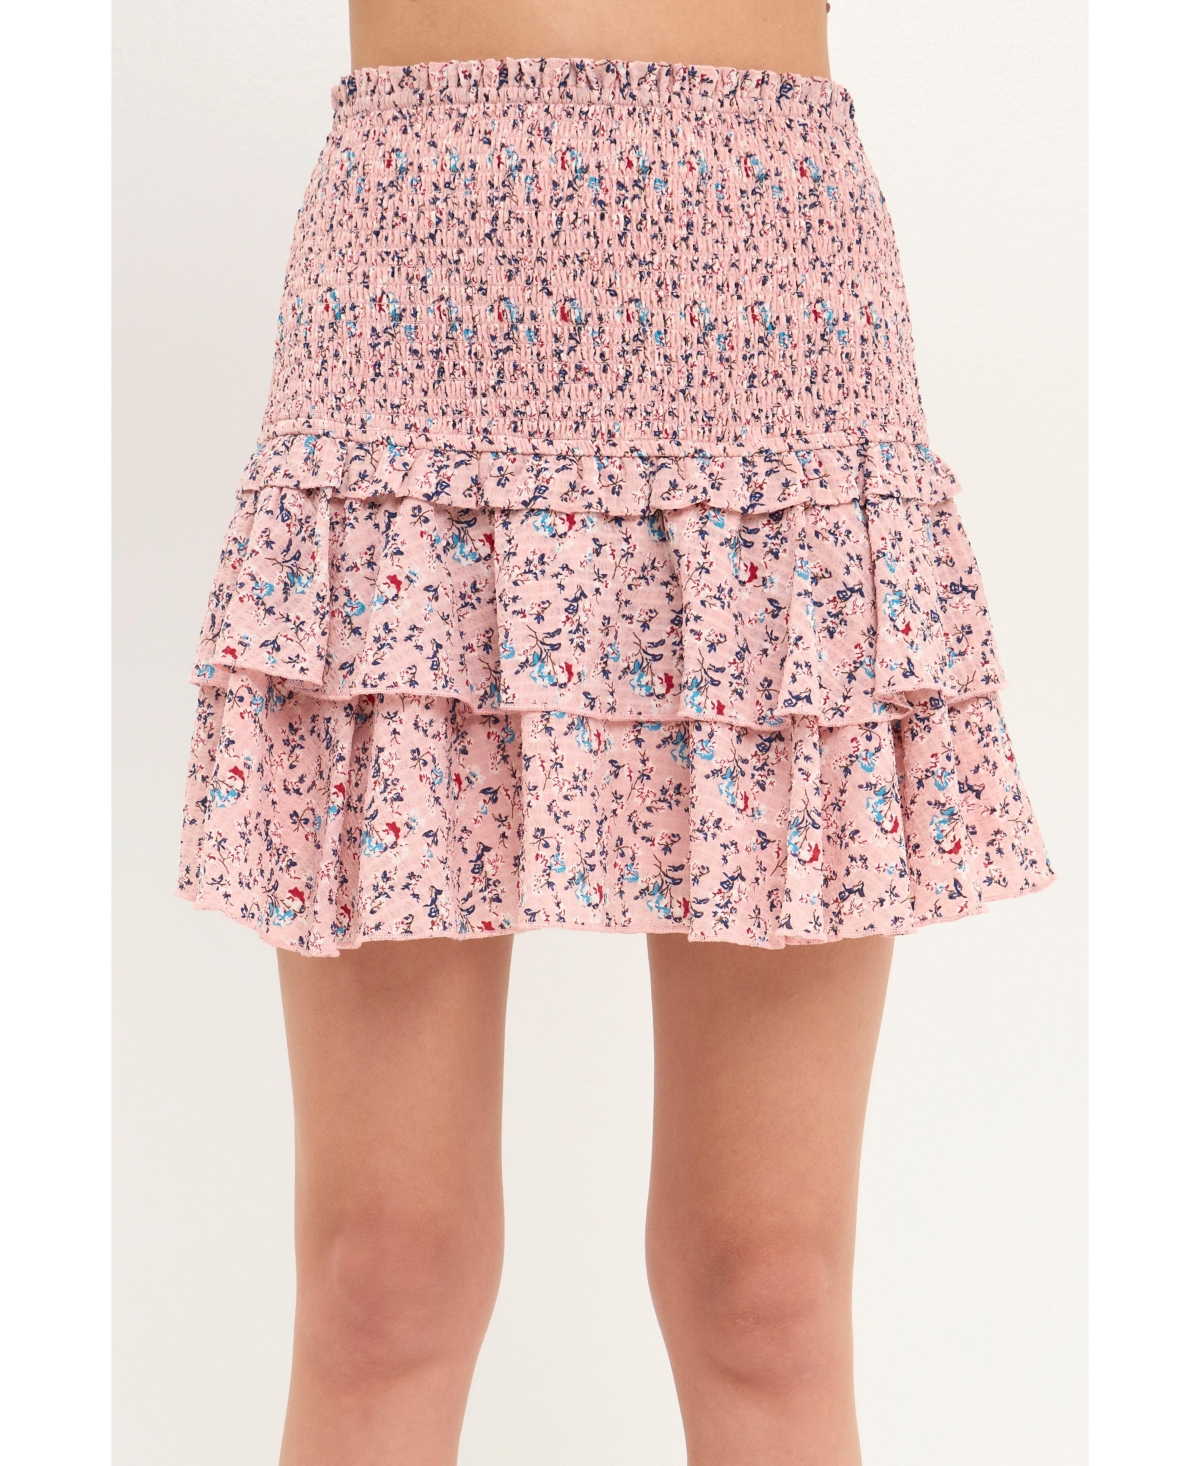 Women's Smocked Textured Floral Tiered Mini Skirt - Pink